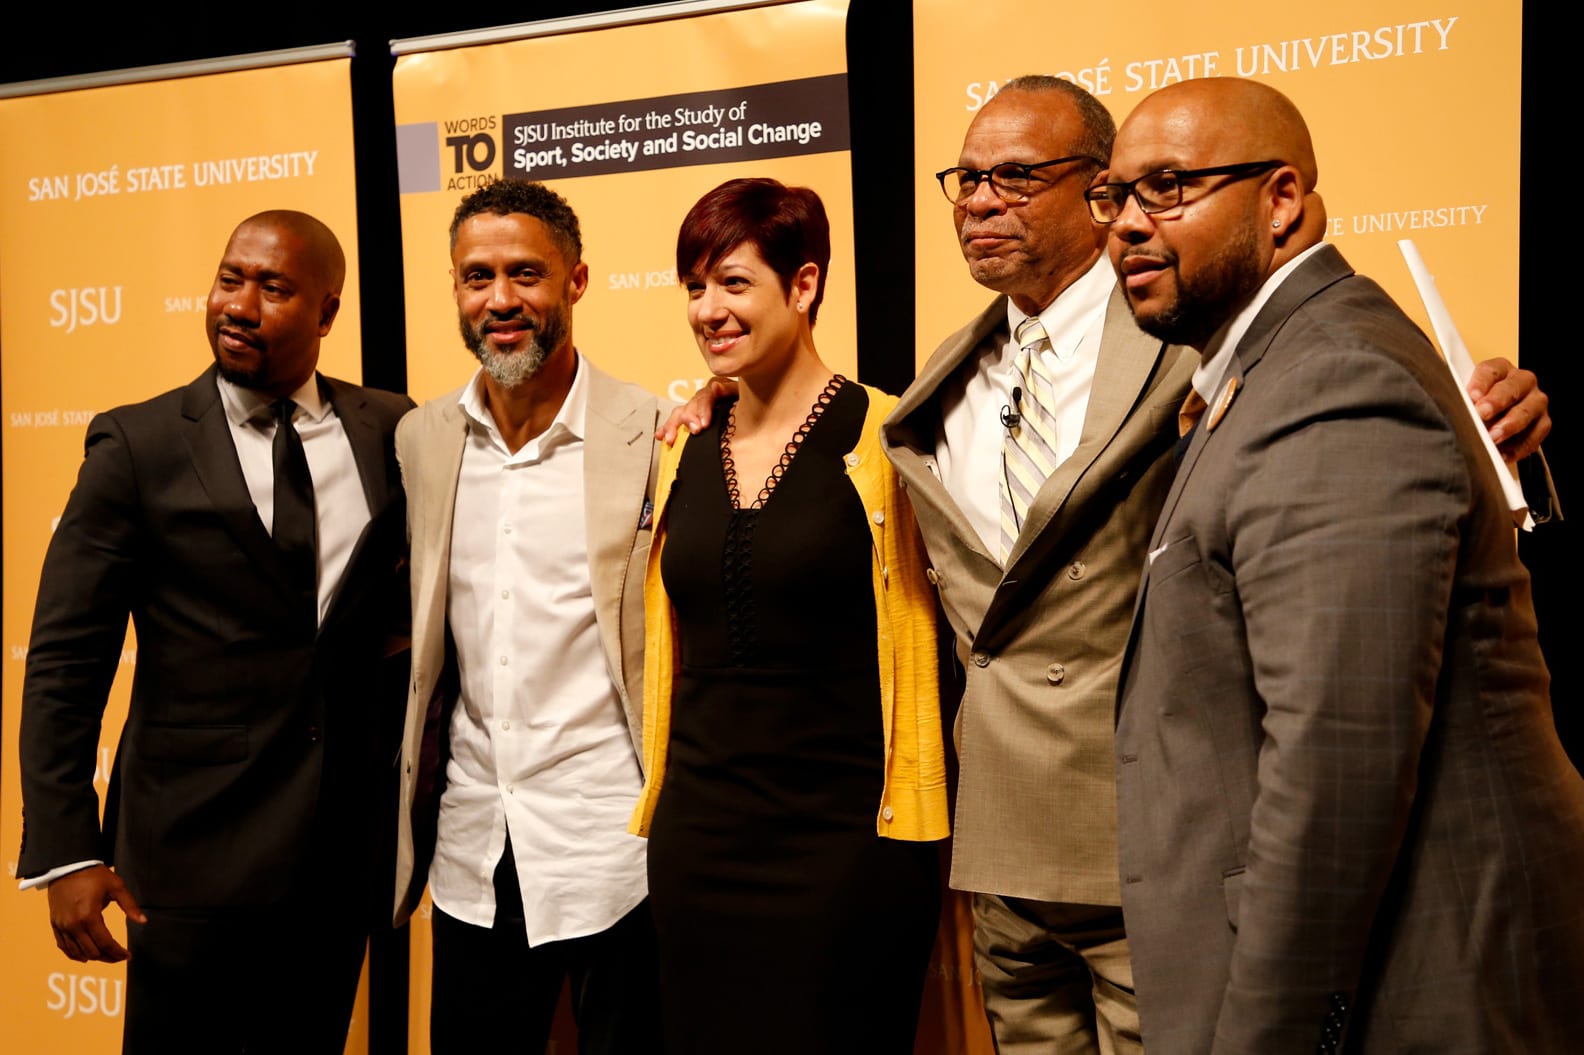 Bridging the Gap: Perspectives on Athlete Activism in an Era of Growth Panelists Damion Thomas, Mahmoud Abdul-Rauf, Toni Smith-Thompson, and C. Keith Harrison (right) pose with Moderator Bill Rhoden, (second from the right.)